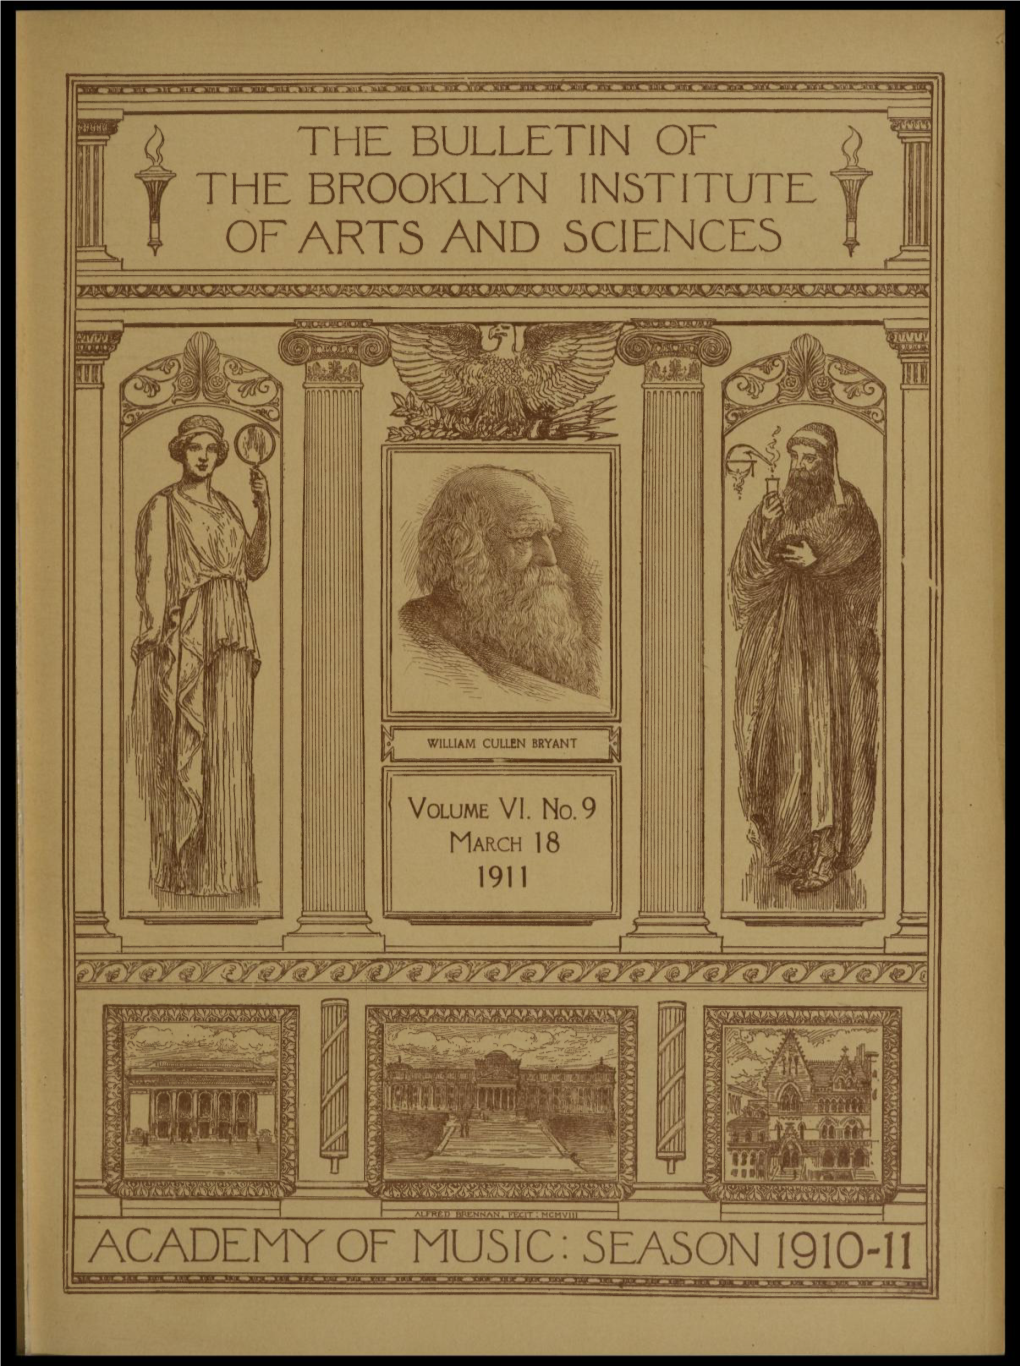 The Bulletin of the Brooklyn Institute of Arts and Sciences